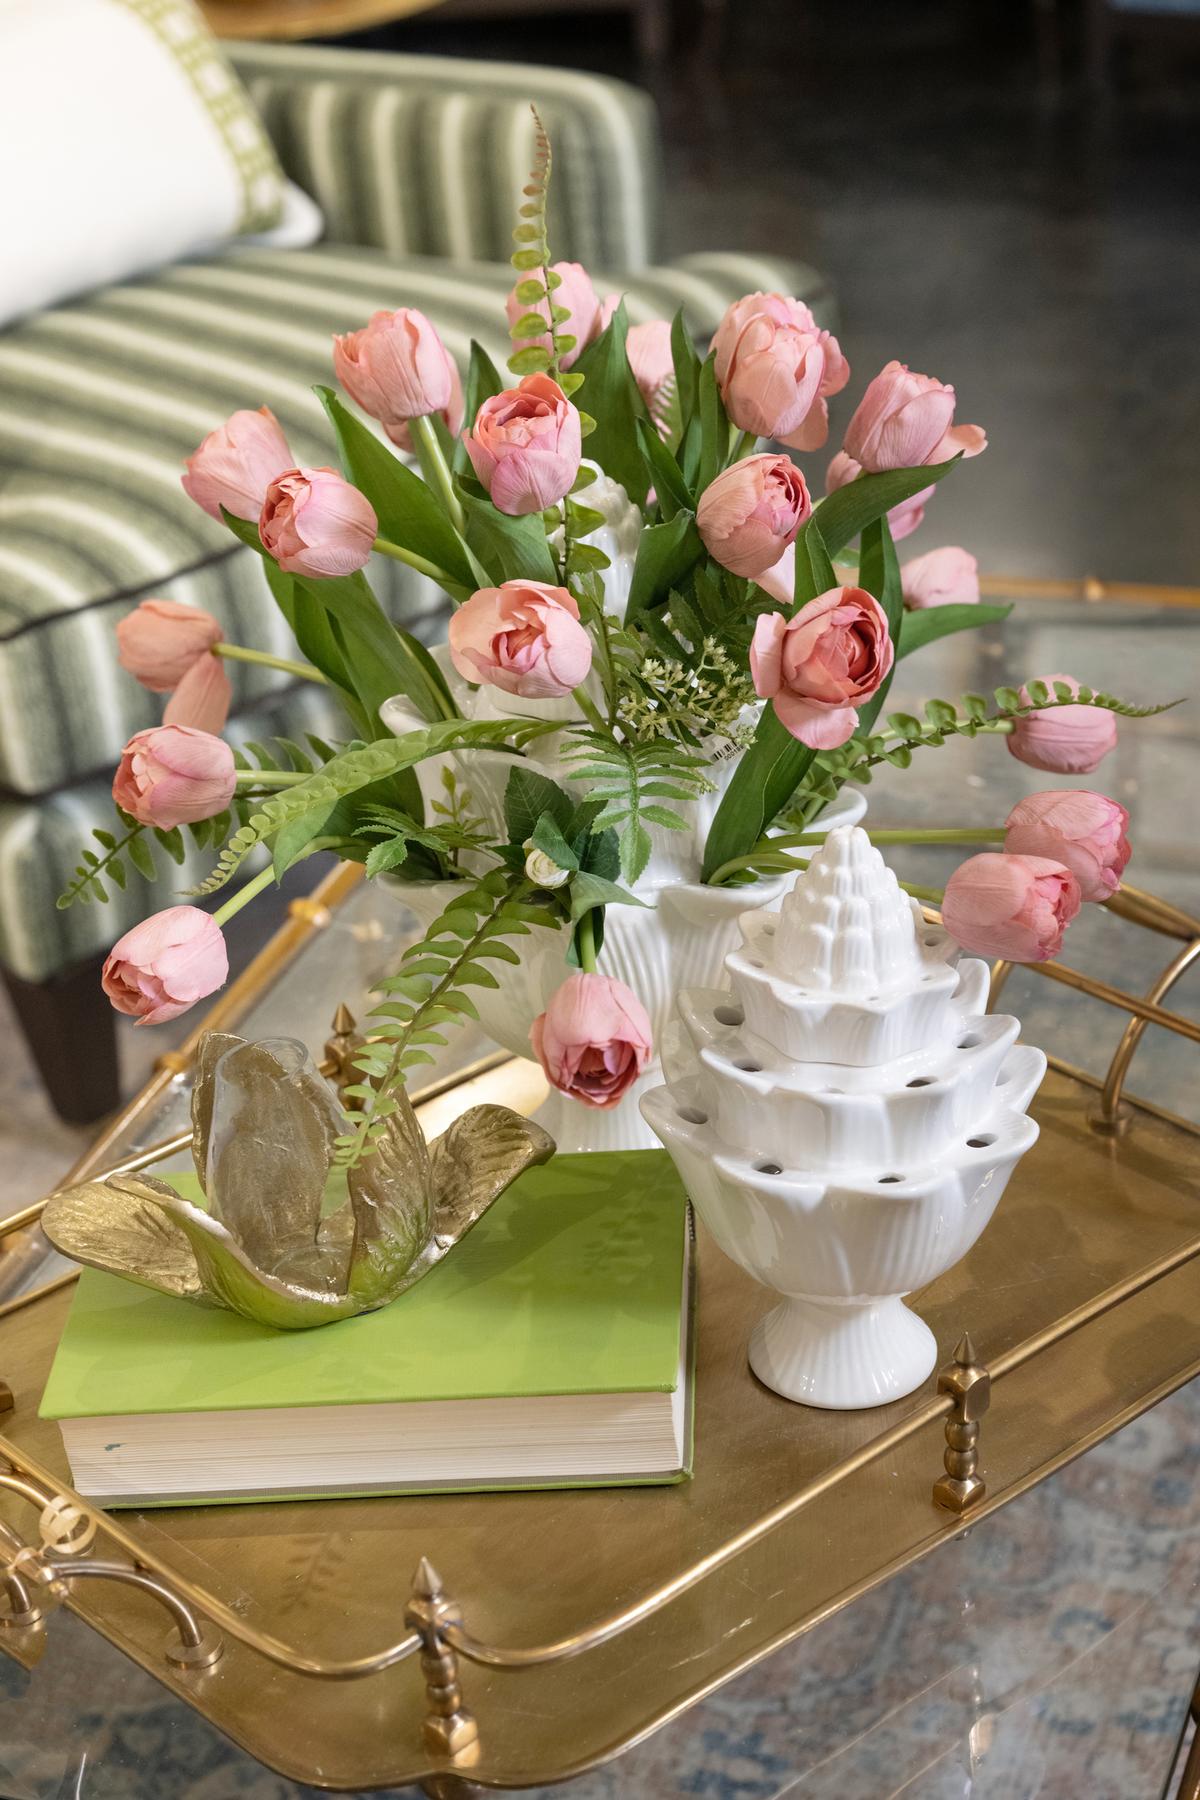 This sweet vignette features a tulipiere with a new traditional twist. (Handout/TNS)